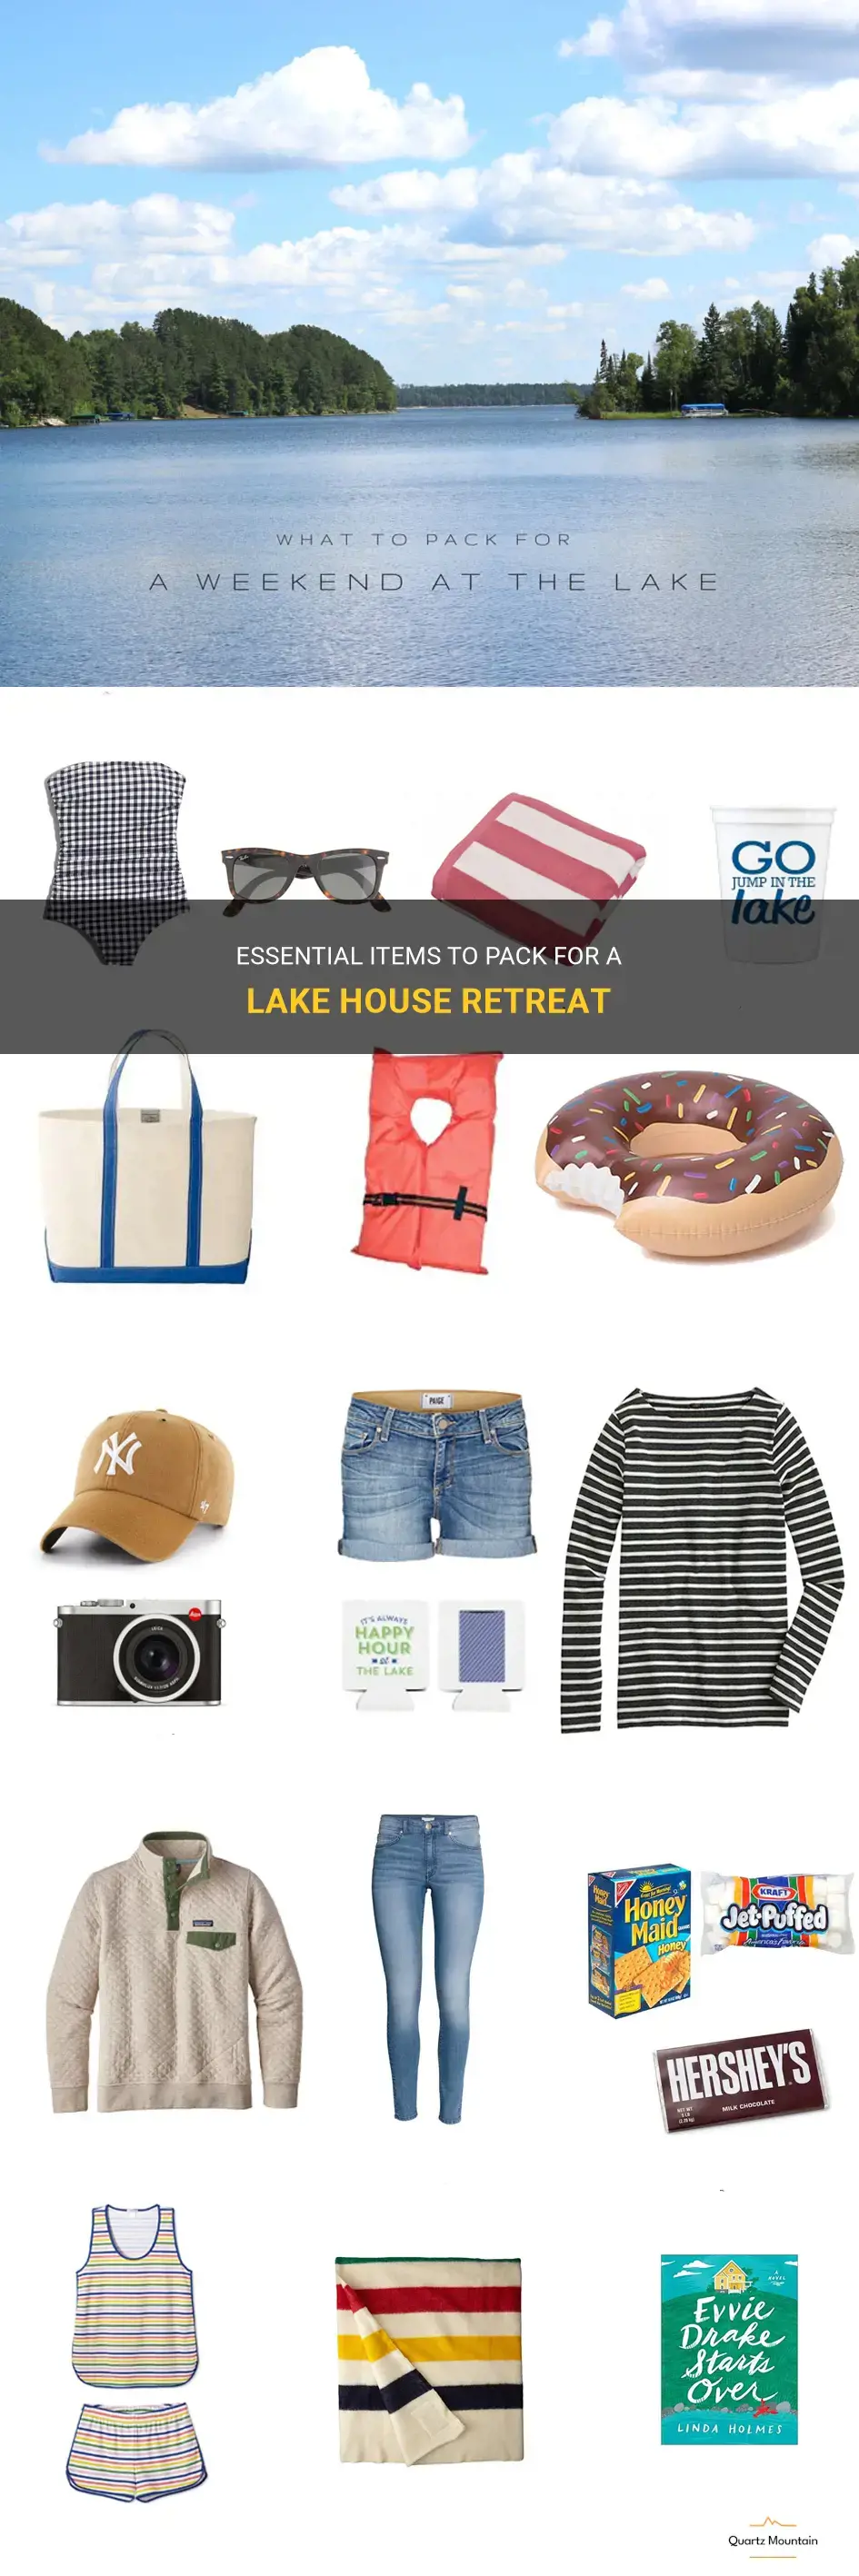 what to pack for lake house